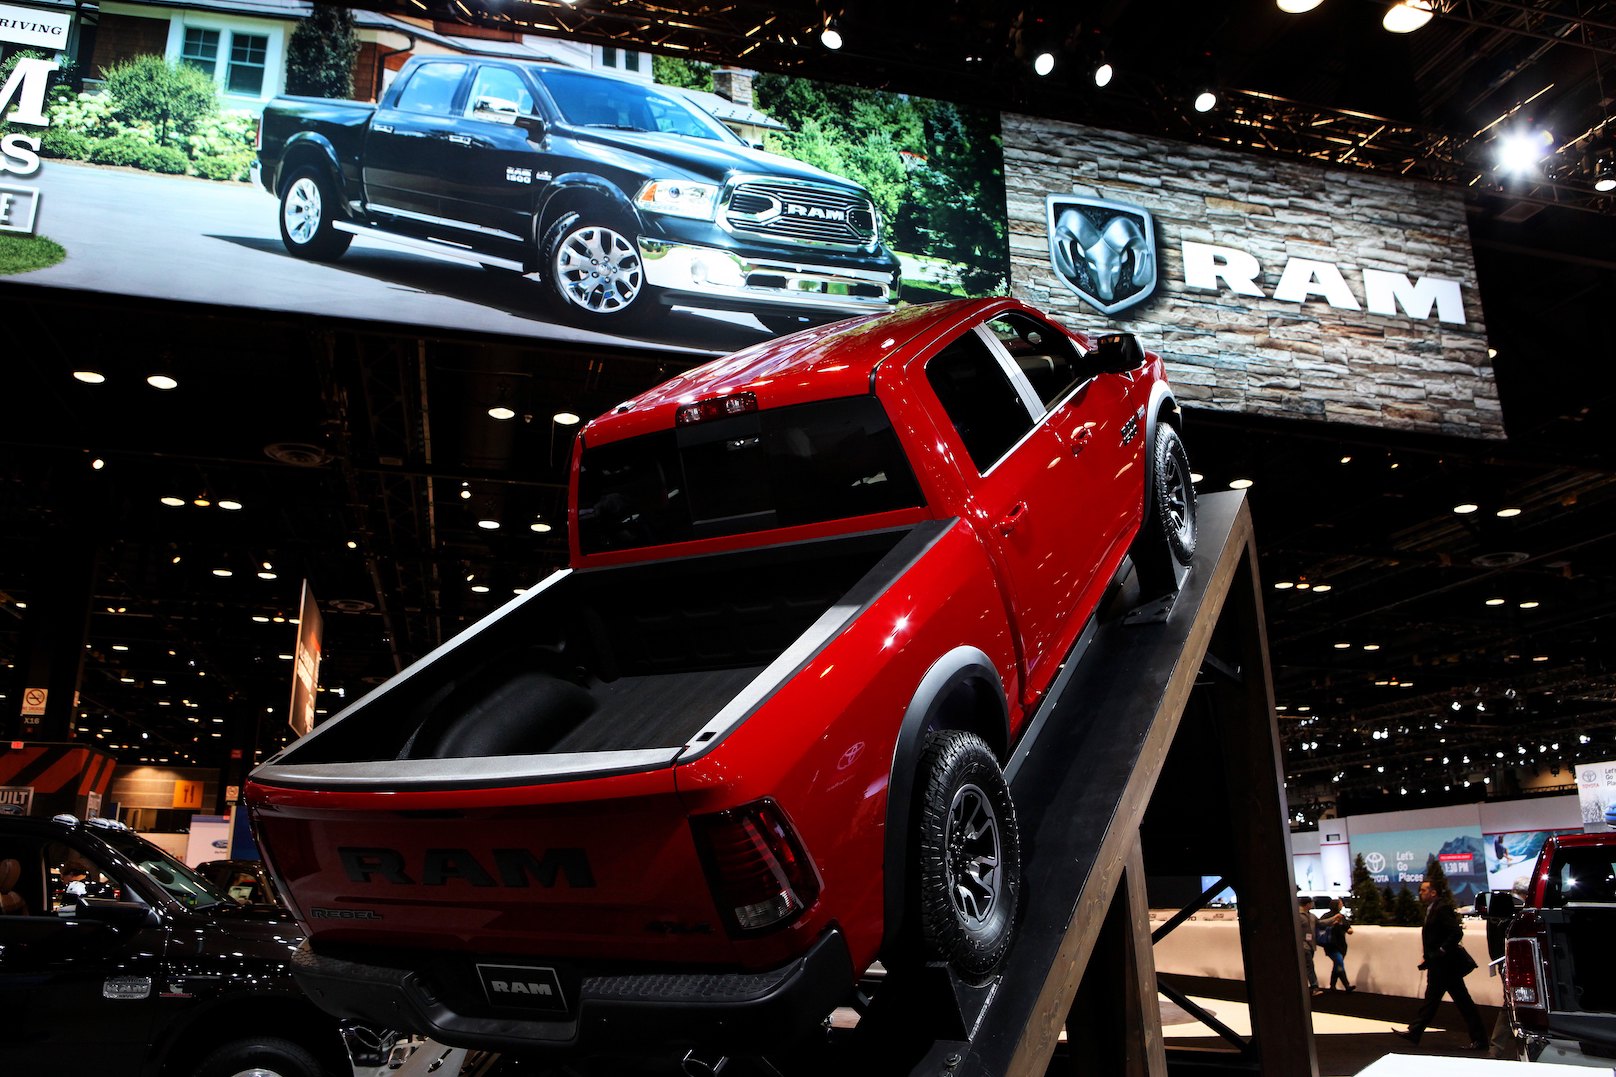 2016 RAM 1500 truck is on display at the 108th Annual Chicago Auto Show at McCormick Place